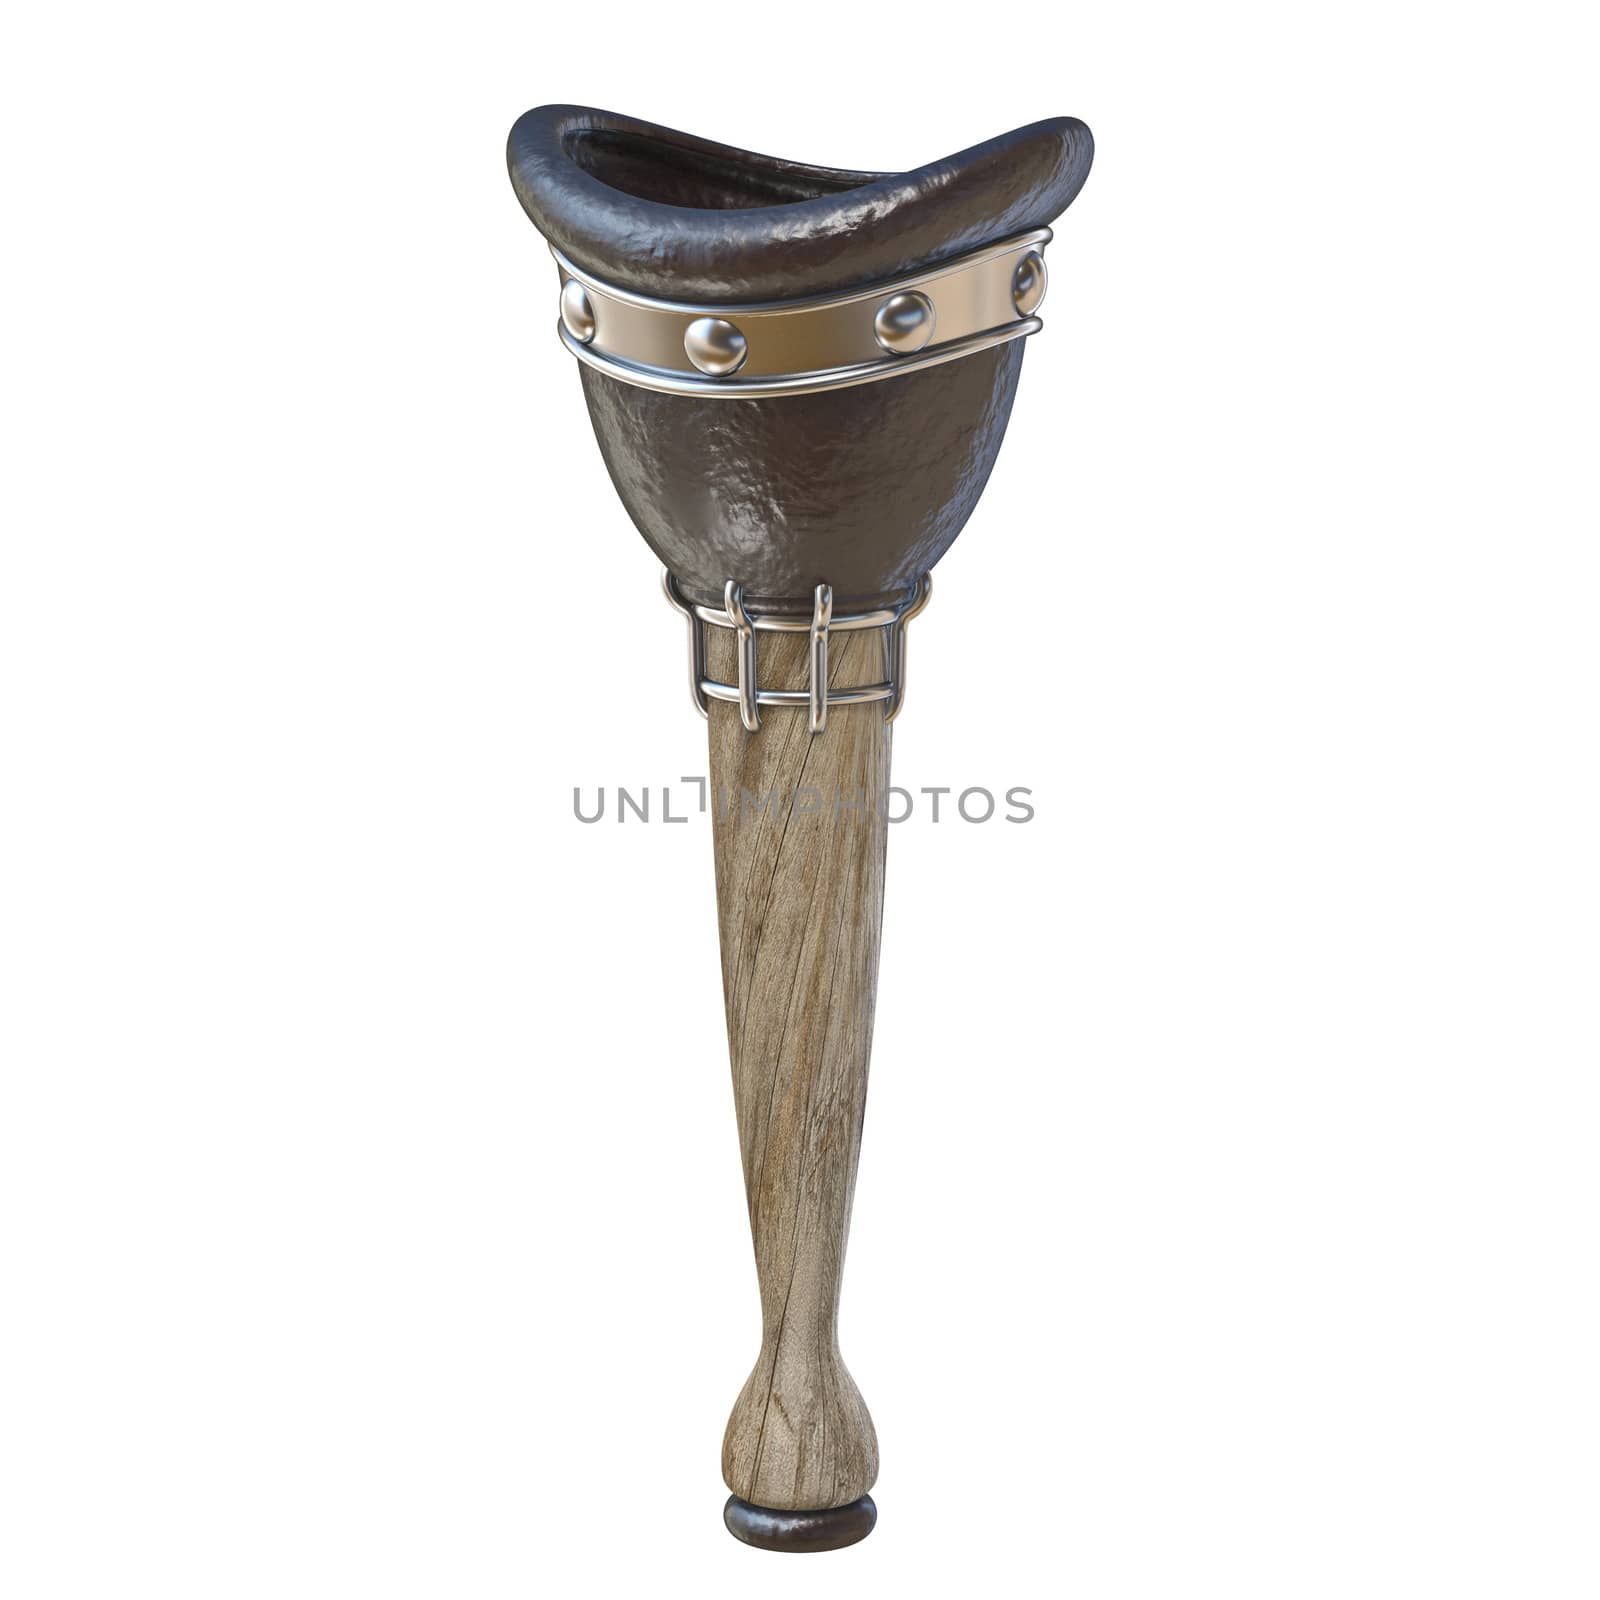 Pirate wooden leg 3D render illustration isolated on white background